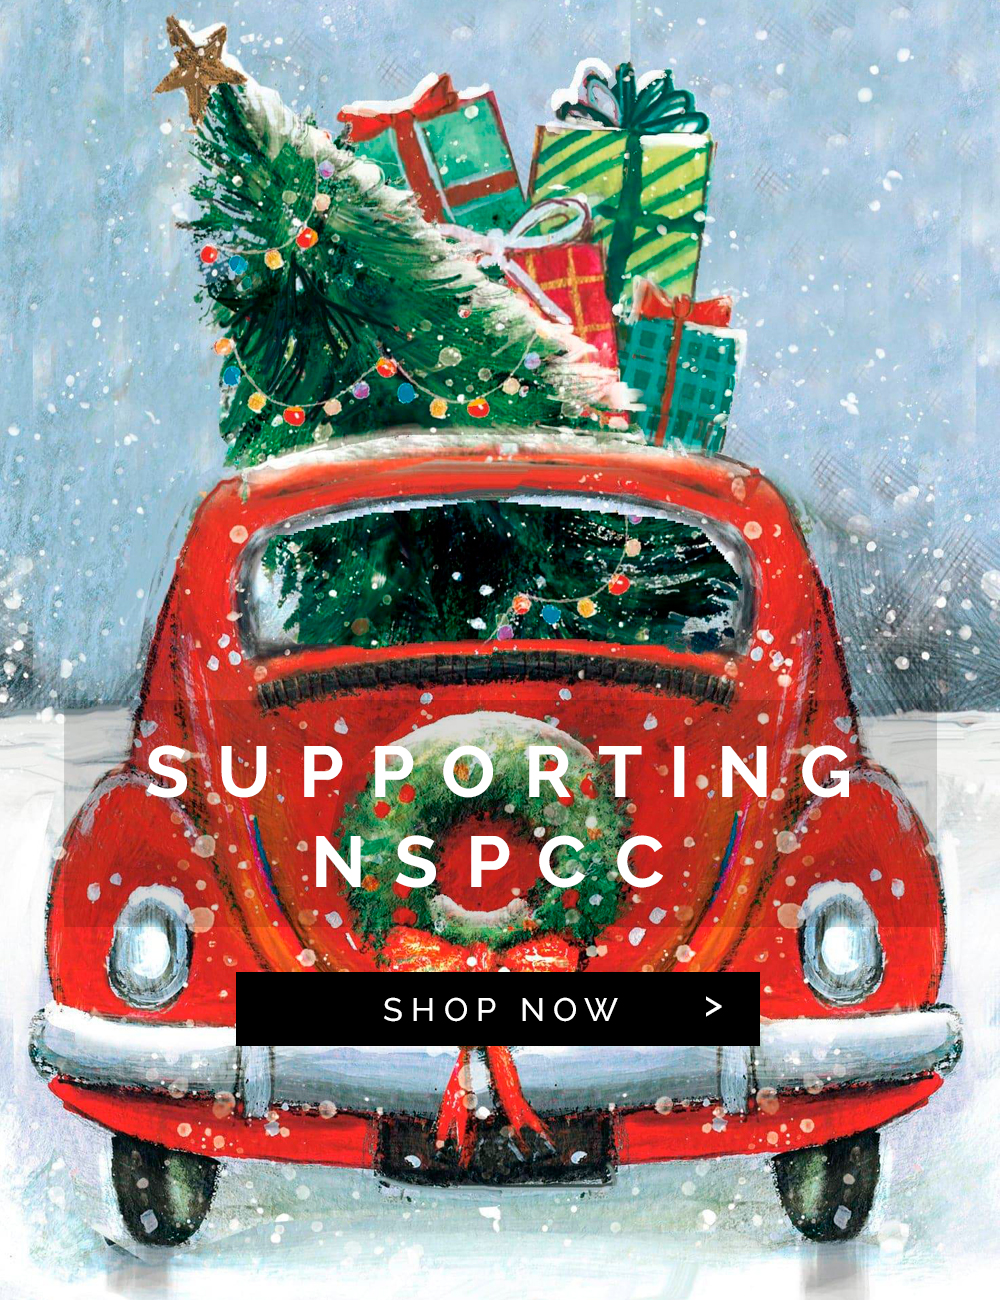 Proud to support the NSPCC. Donating 10% of all December sales to the NSPCC